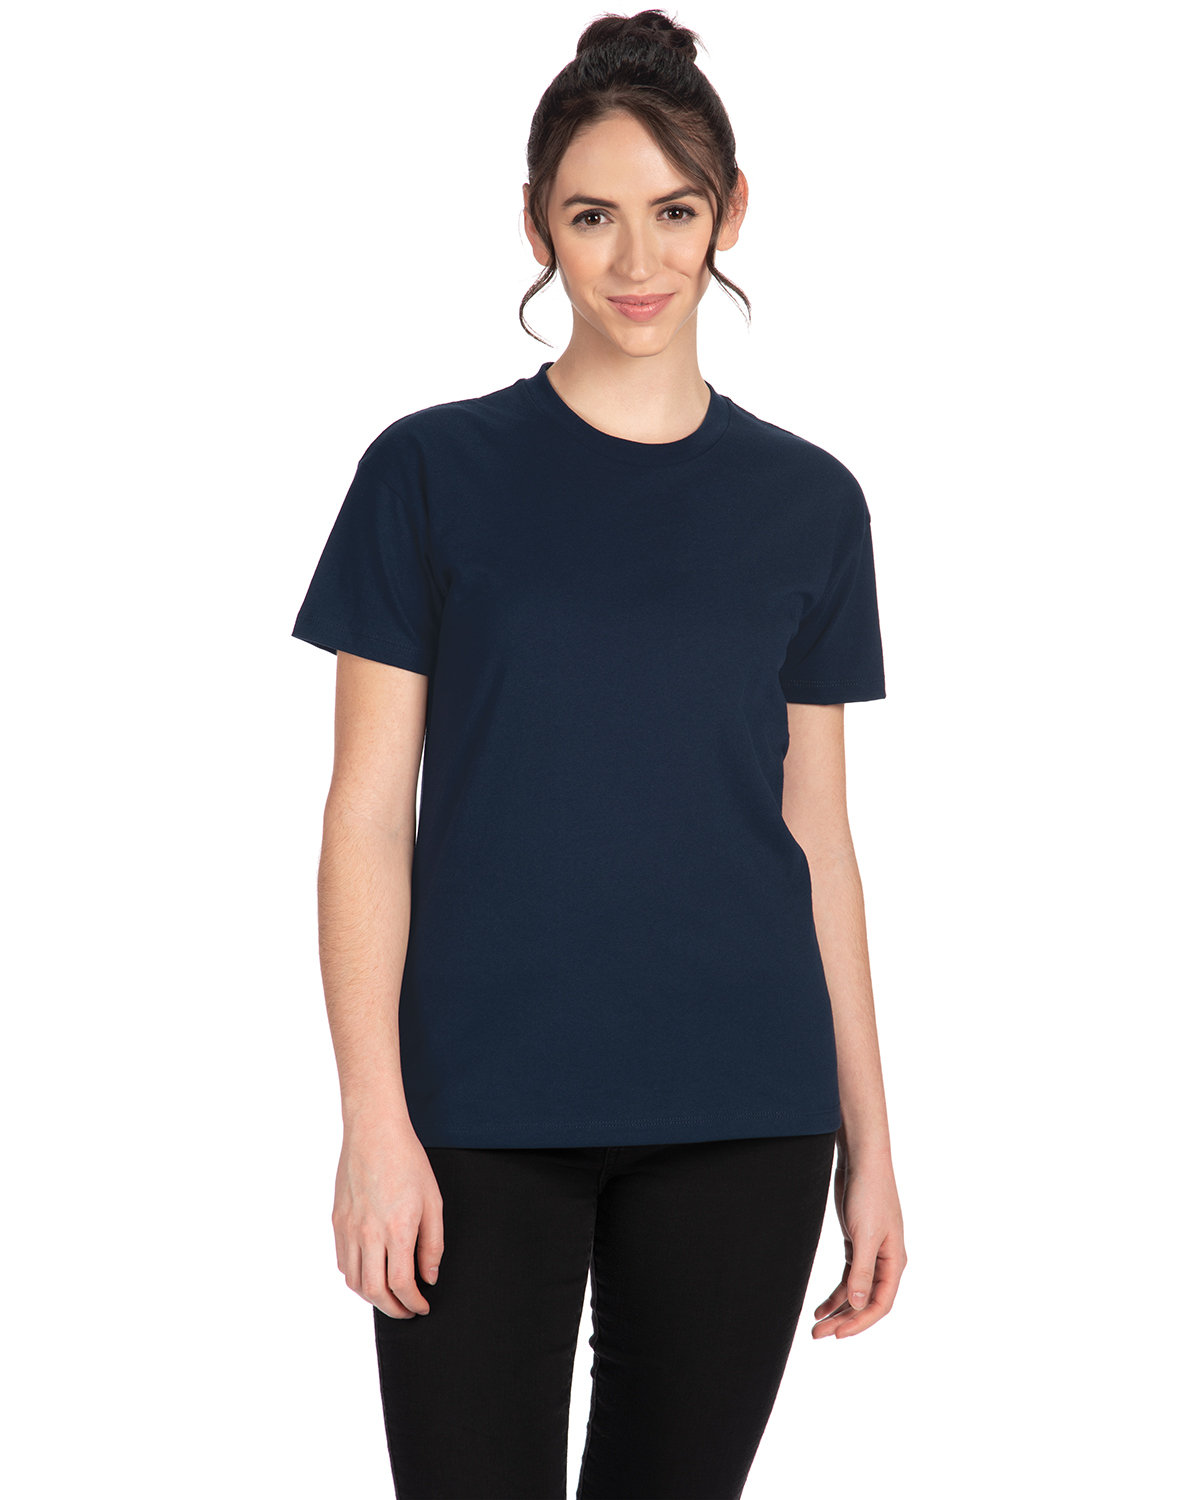 Next Level Apparel Ladies' Relaxed T-Shirt | alphabroder